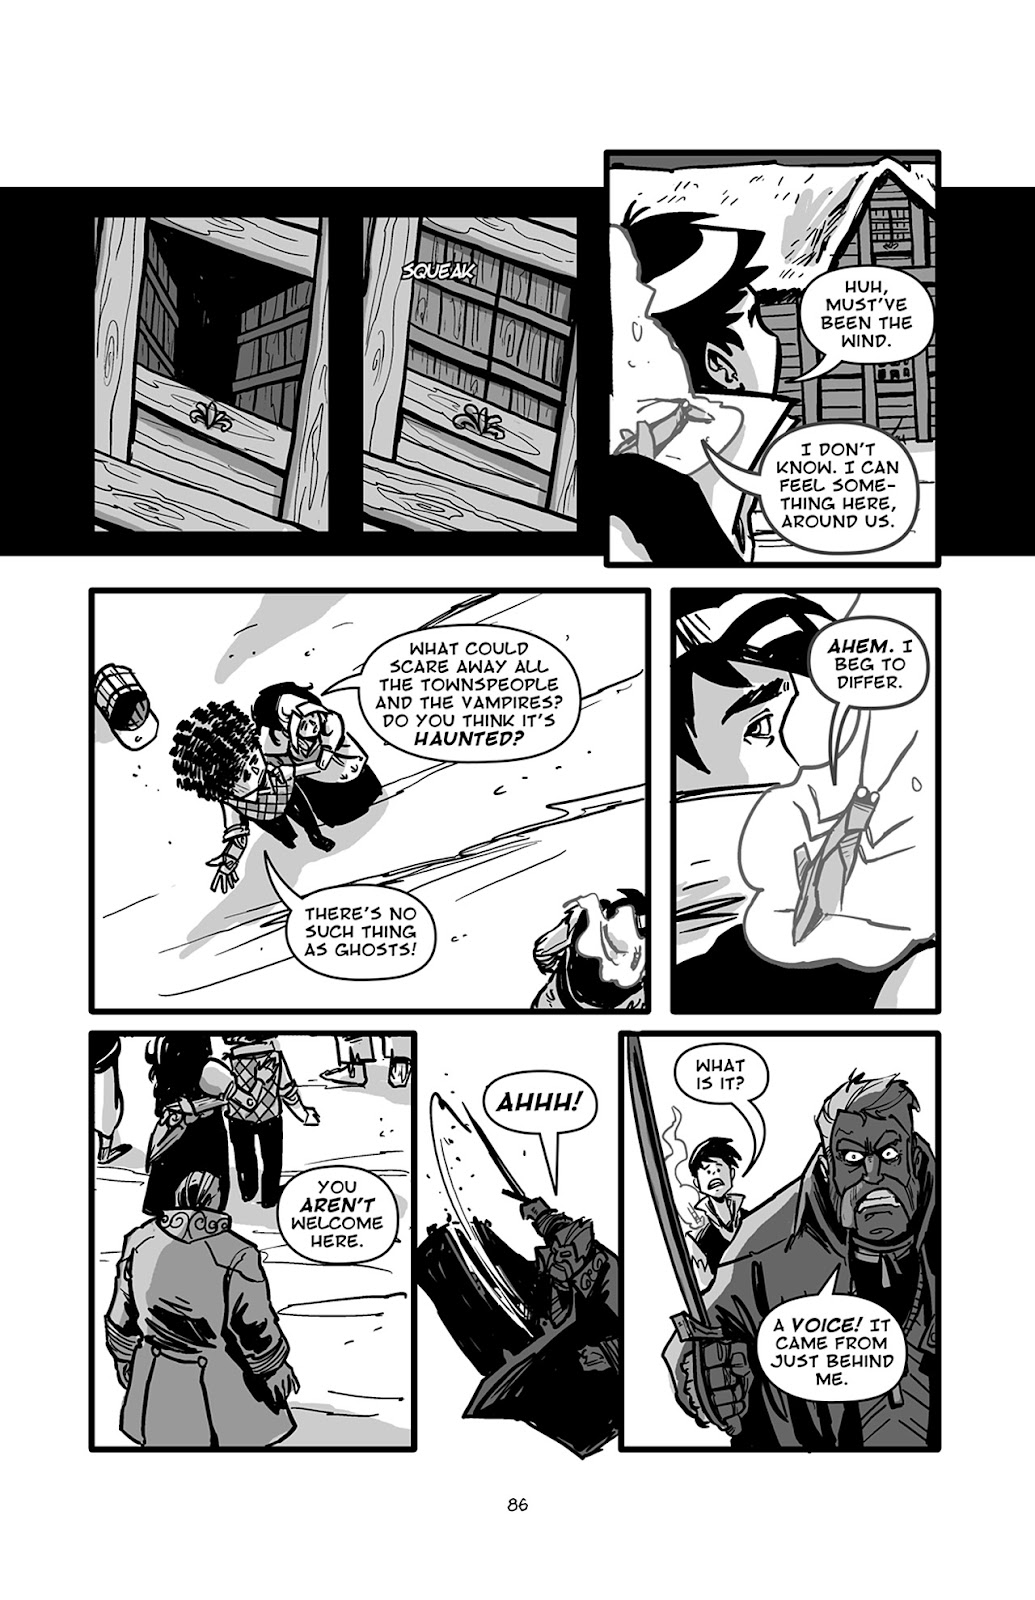 Pinocchio: Vampire Slayer - Of Wood and Blood issue 4 - Page 13